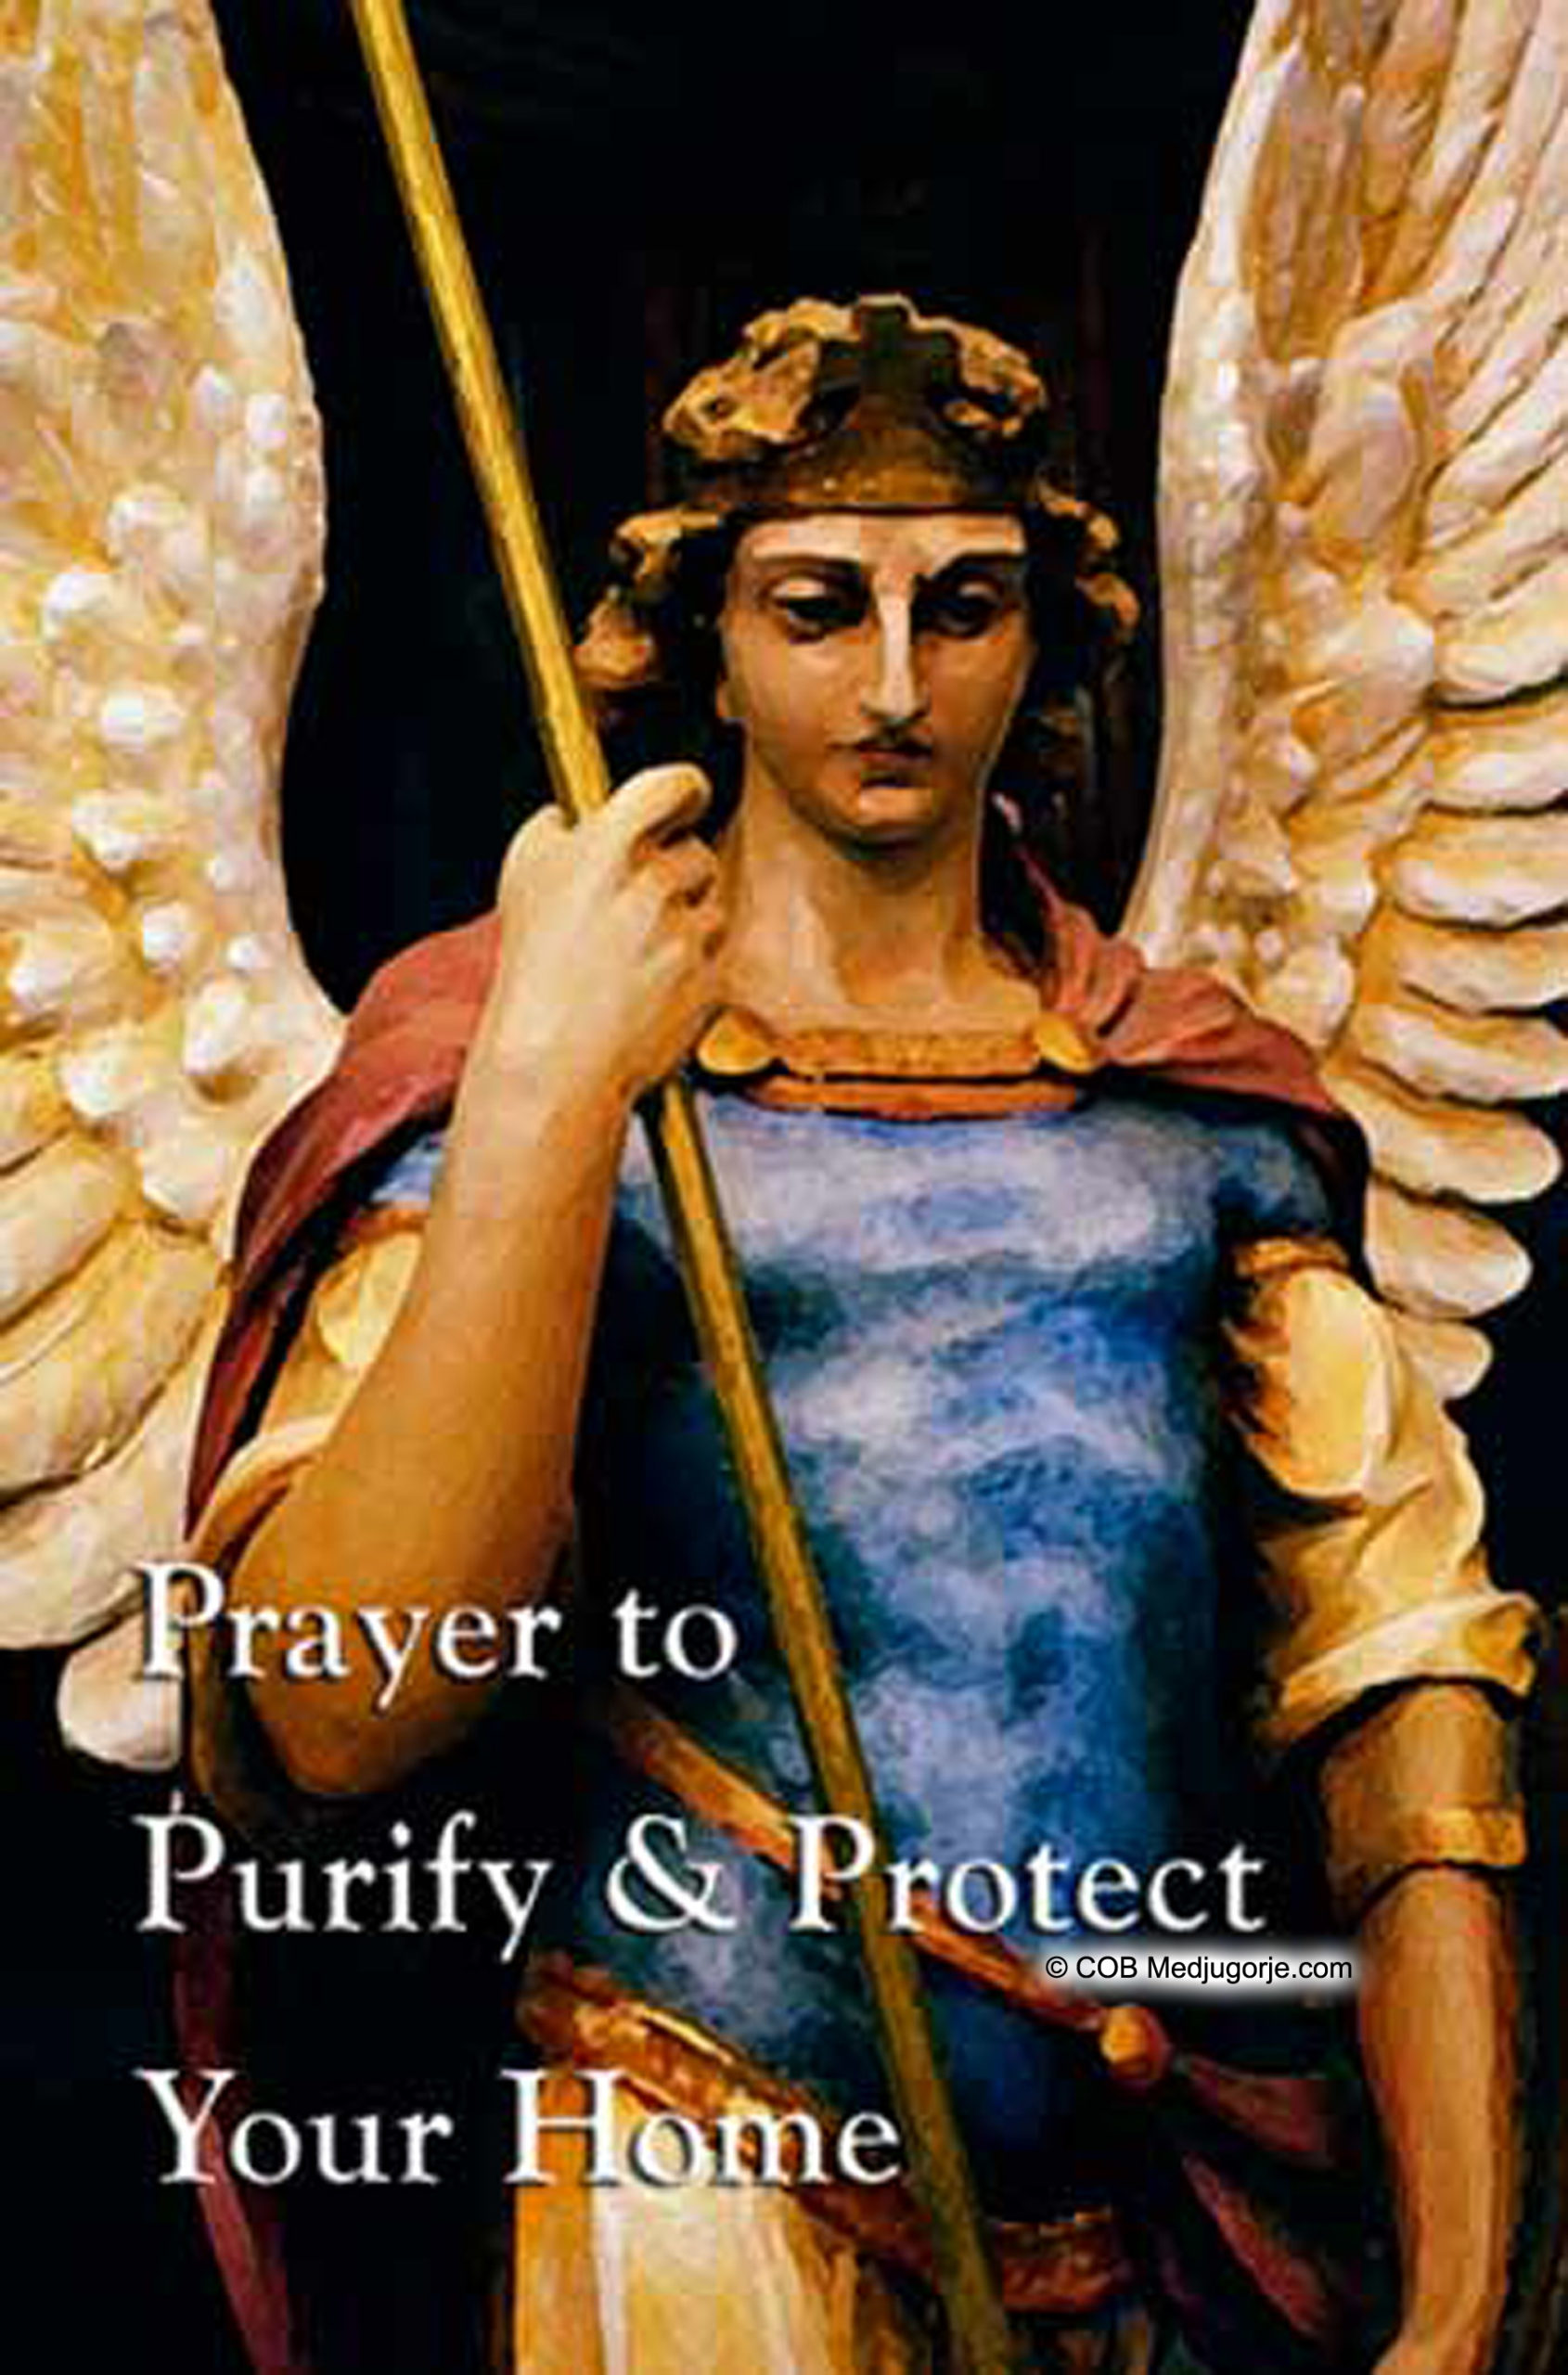 Prayer to Purify and Protect Your Home